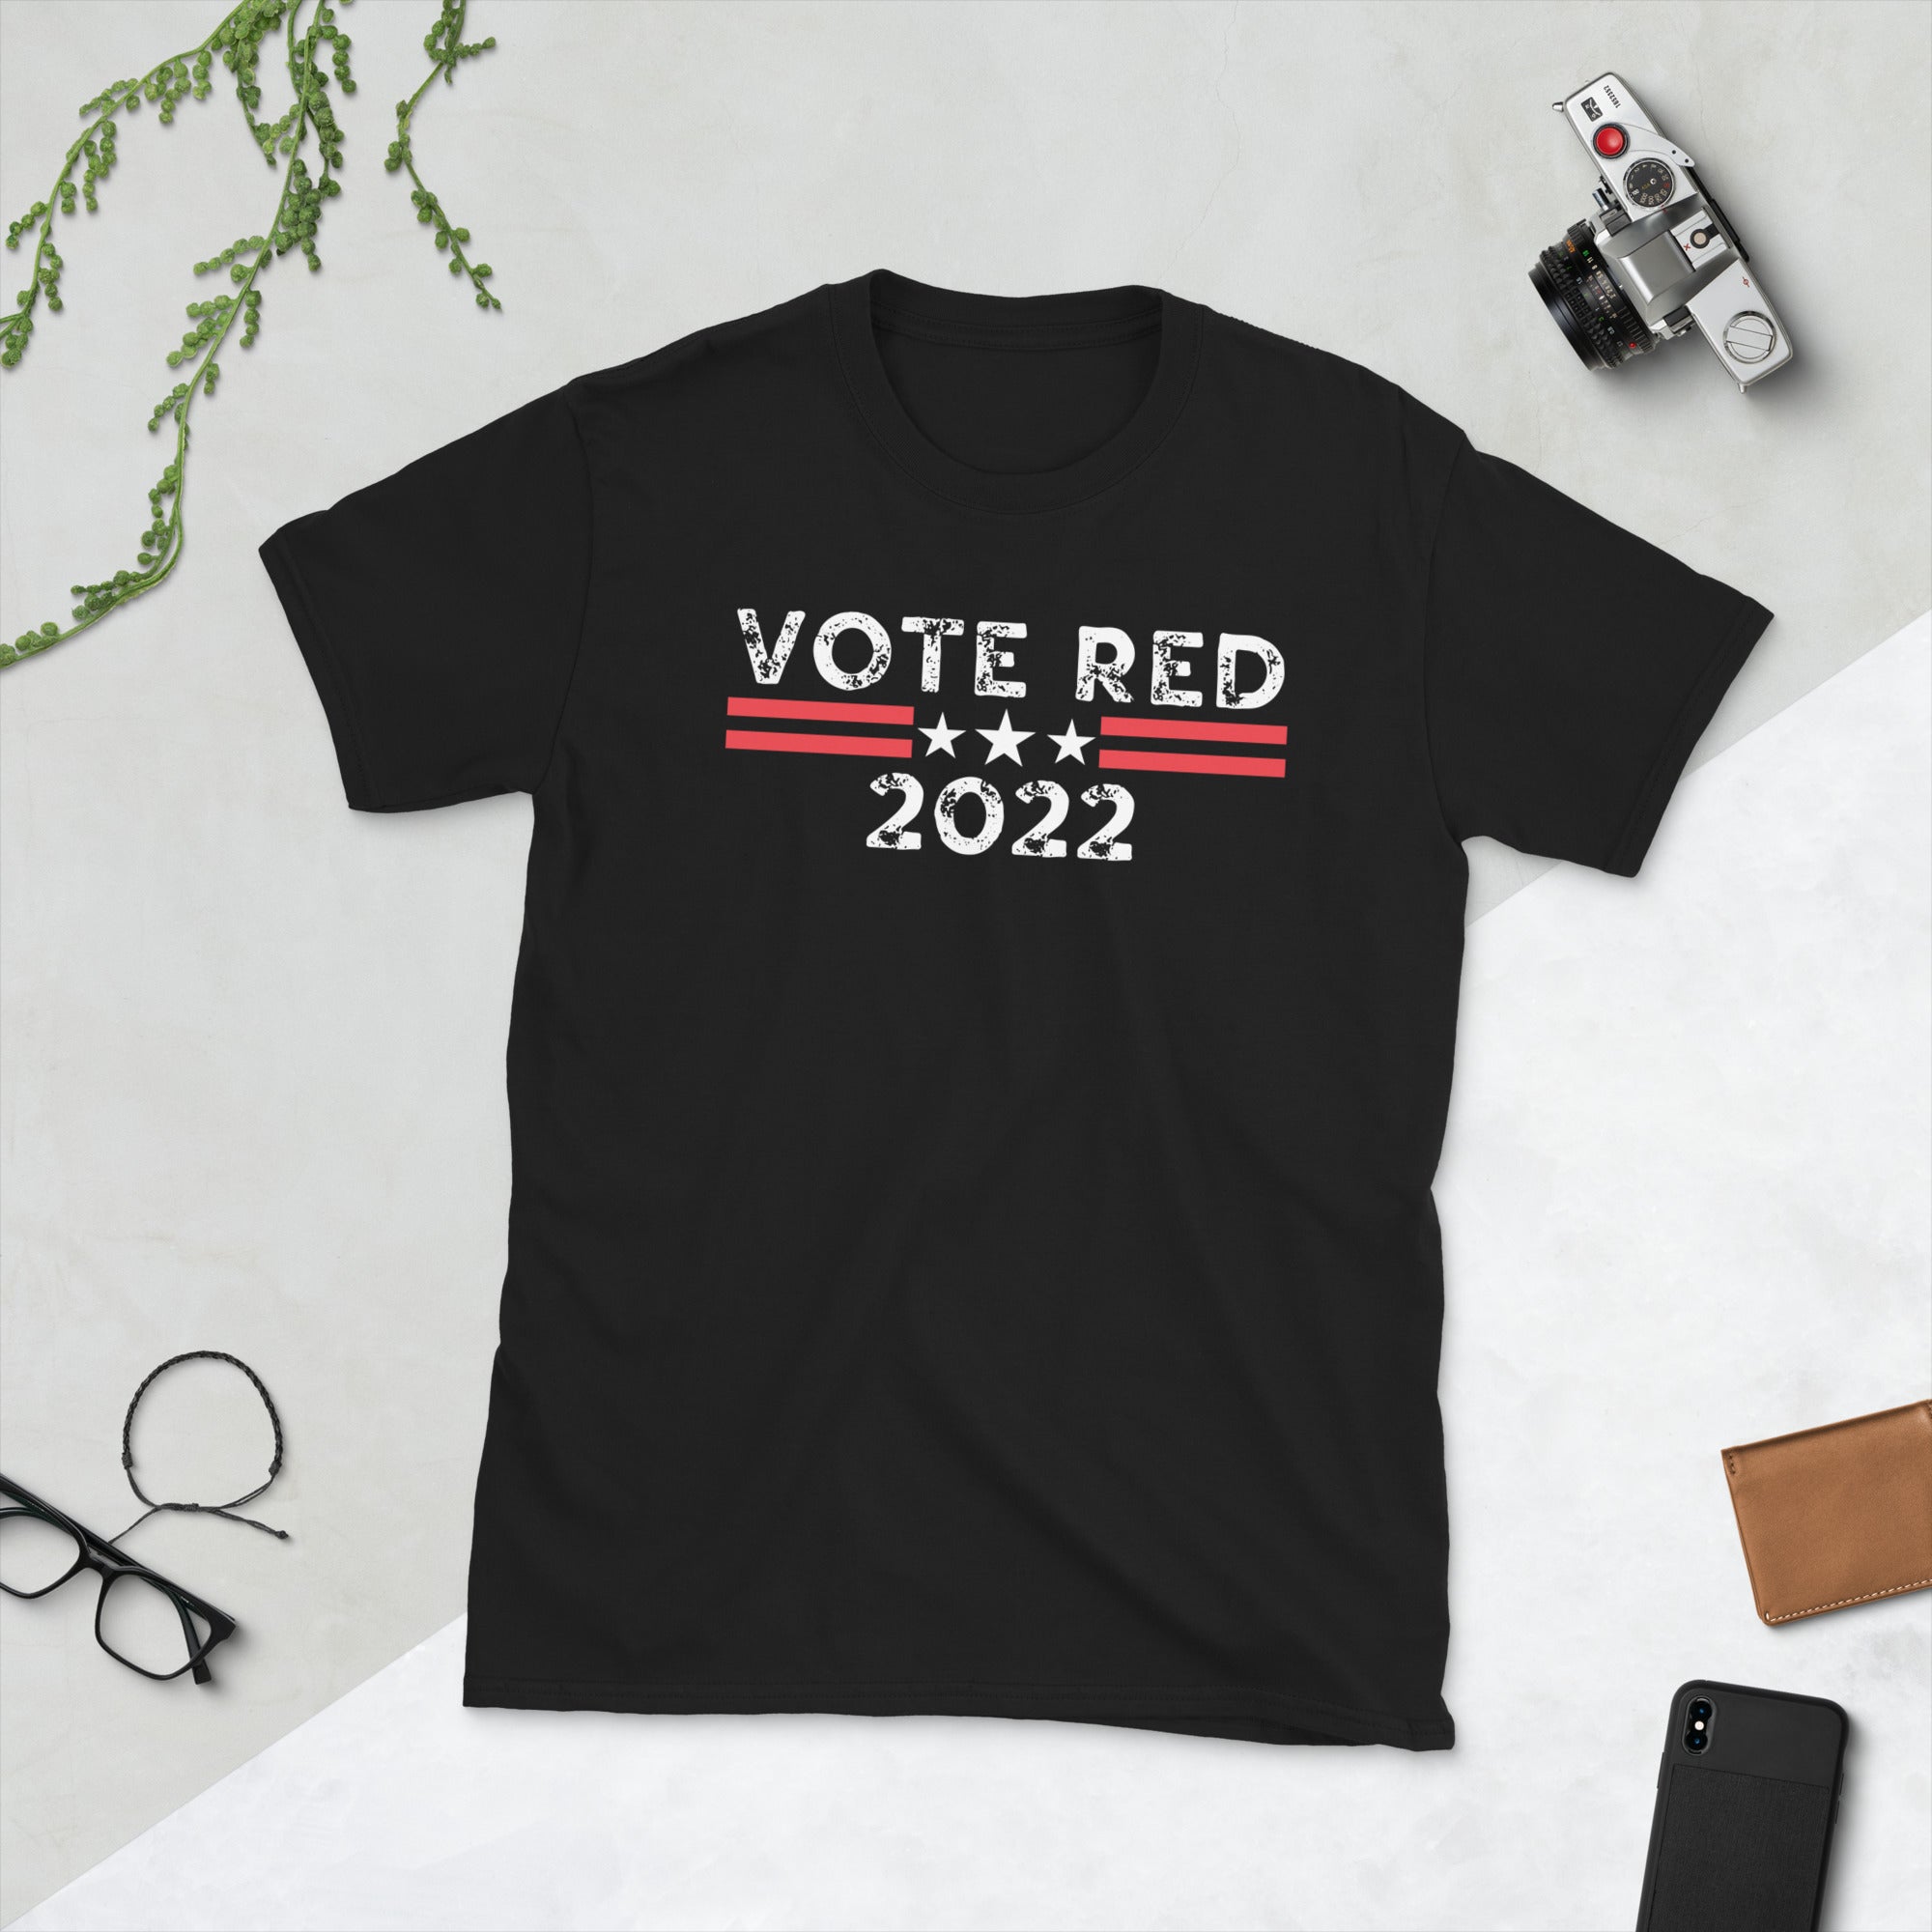 Vote Red 2022 Shirt, Republican Shirt, Midterm Election 2022, FJB Tshirt, Patriotic Shirt, Red Wave 22, Ultra MAGA Tee, Conservative Gifts - Madeinsea©